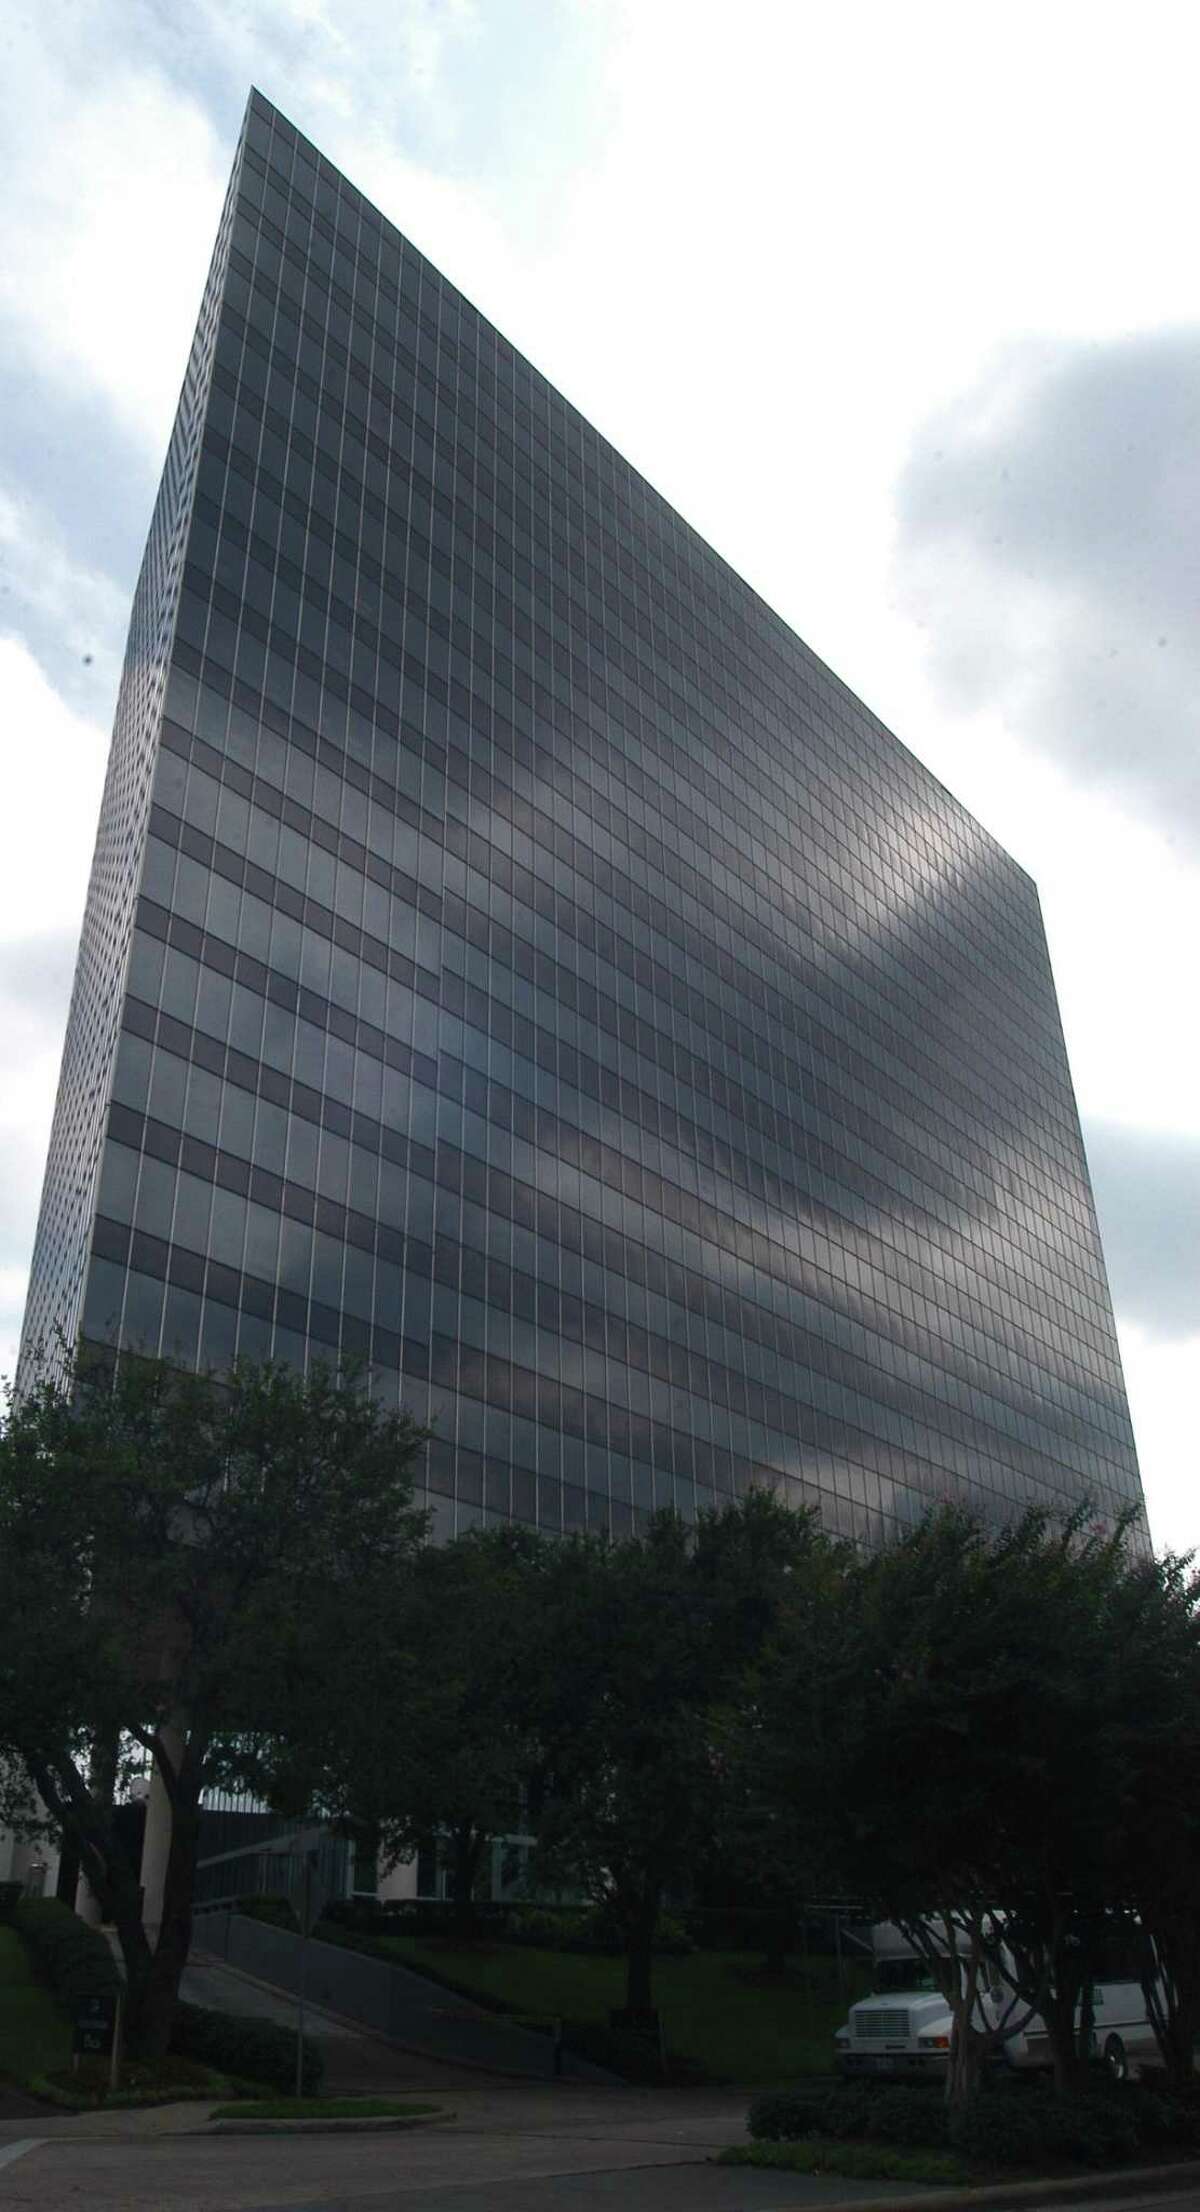 Innovapptive leased 12,905 square feet at Weslayan Tower,